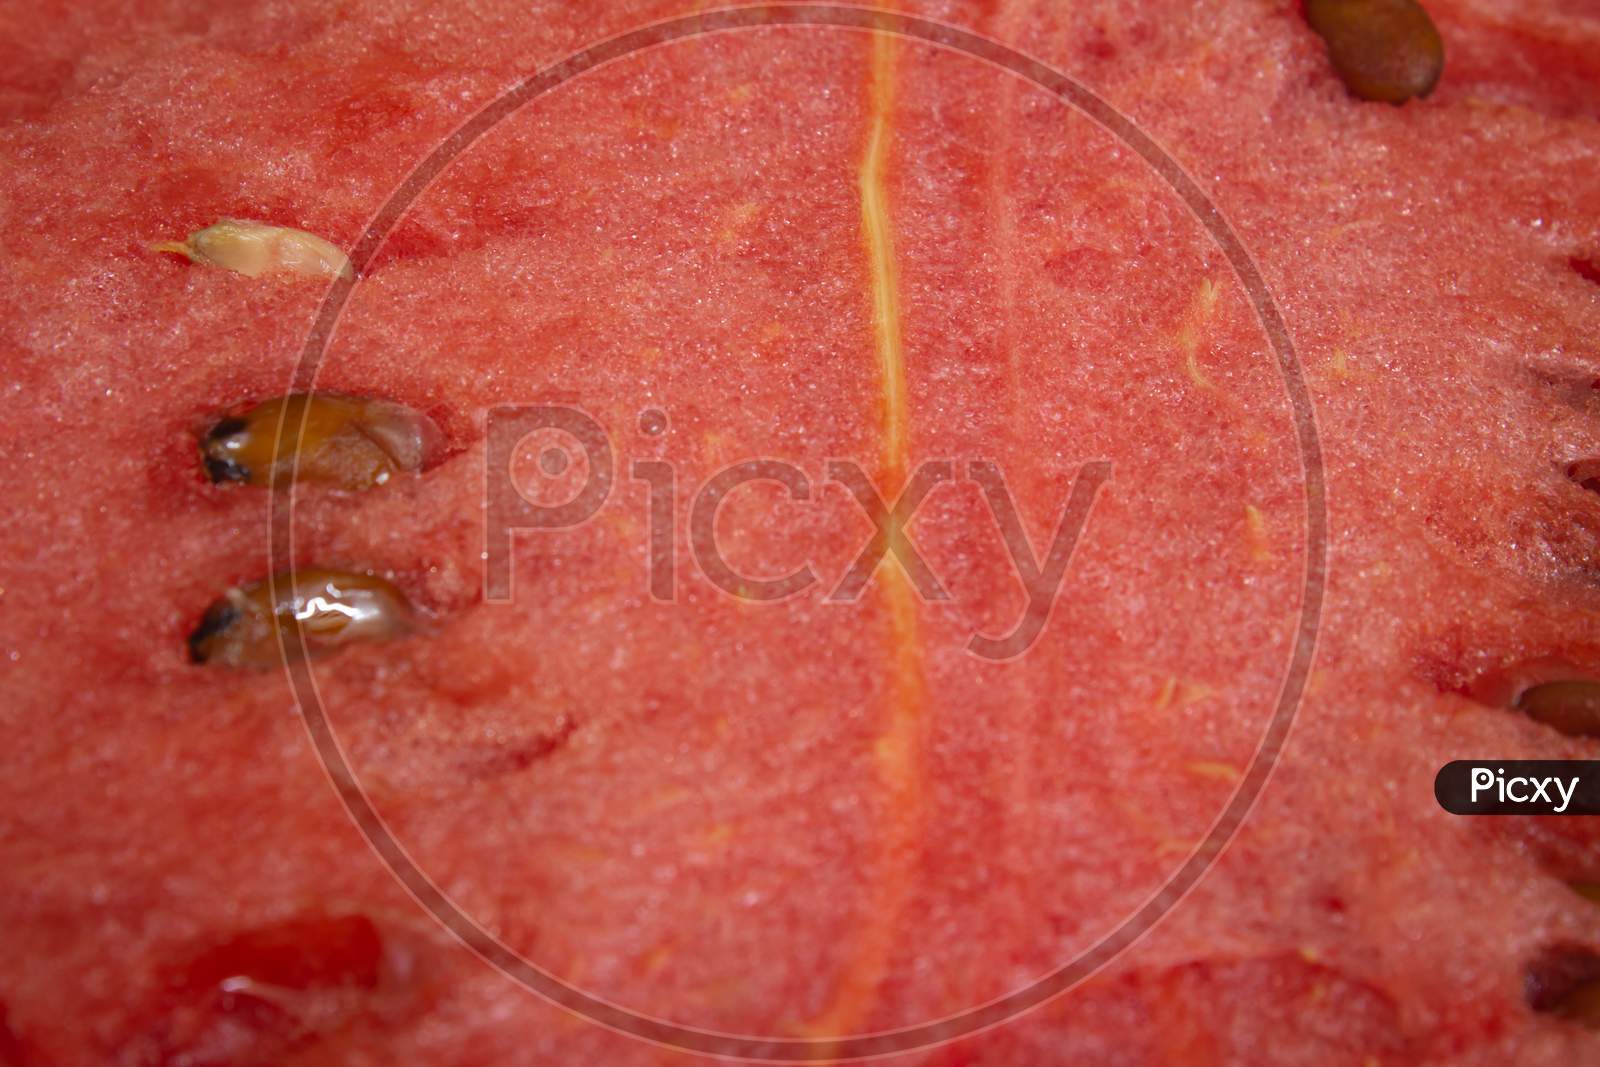 Close View Of The Cut Watermelon Fruit. Use For Healthy Snack Concept.